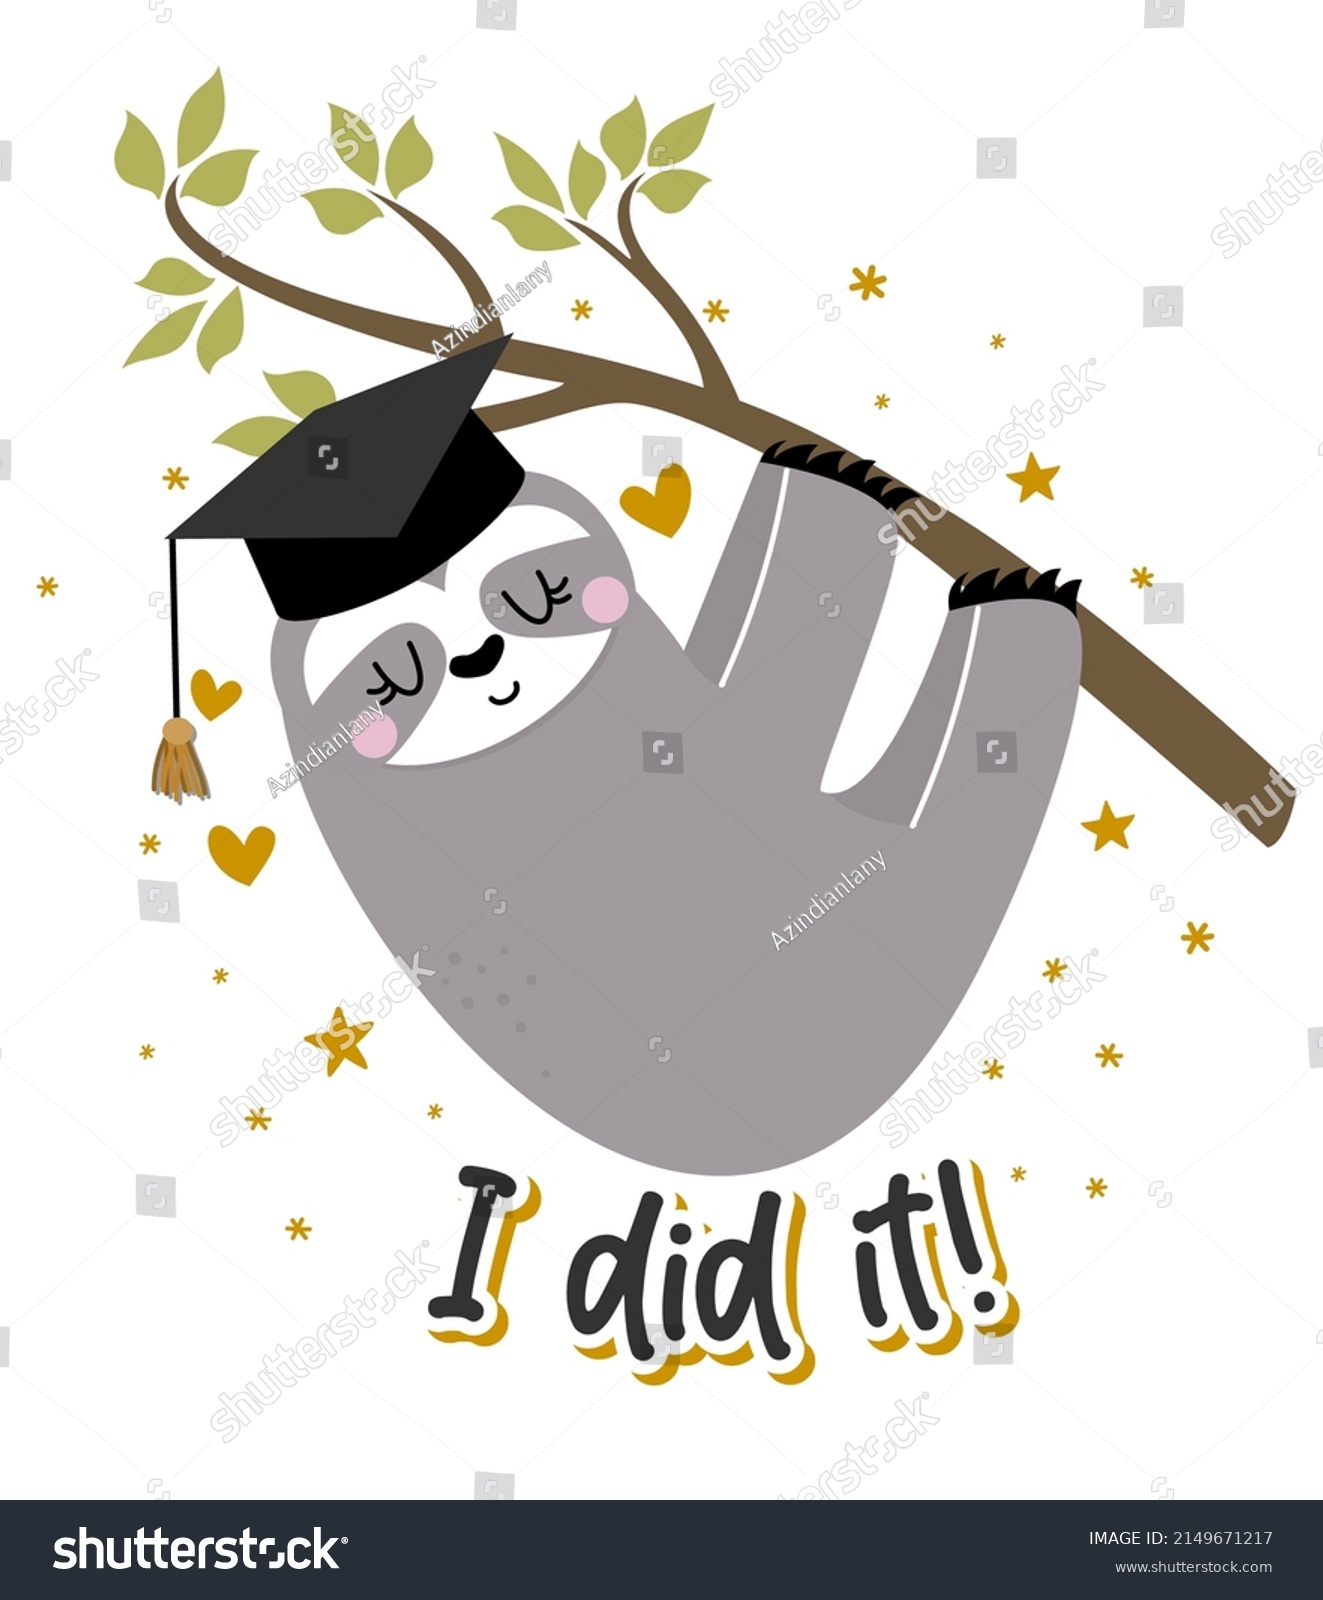 SVG of I did it - Smart Sloth student in graduate cap. Cute Sloth character. Hand drawn doodle for kids. Good for textiles, school sets, wallpapers, wrapping paper, clothes. svg